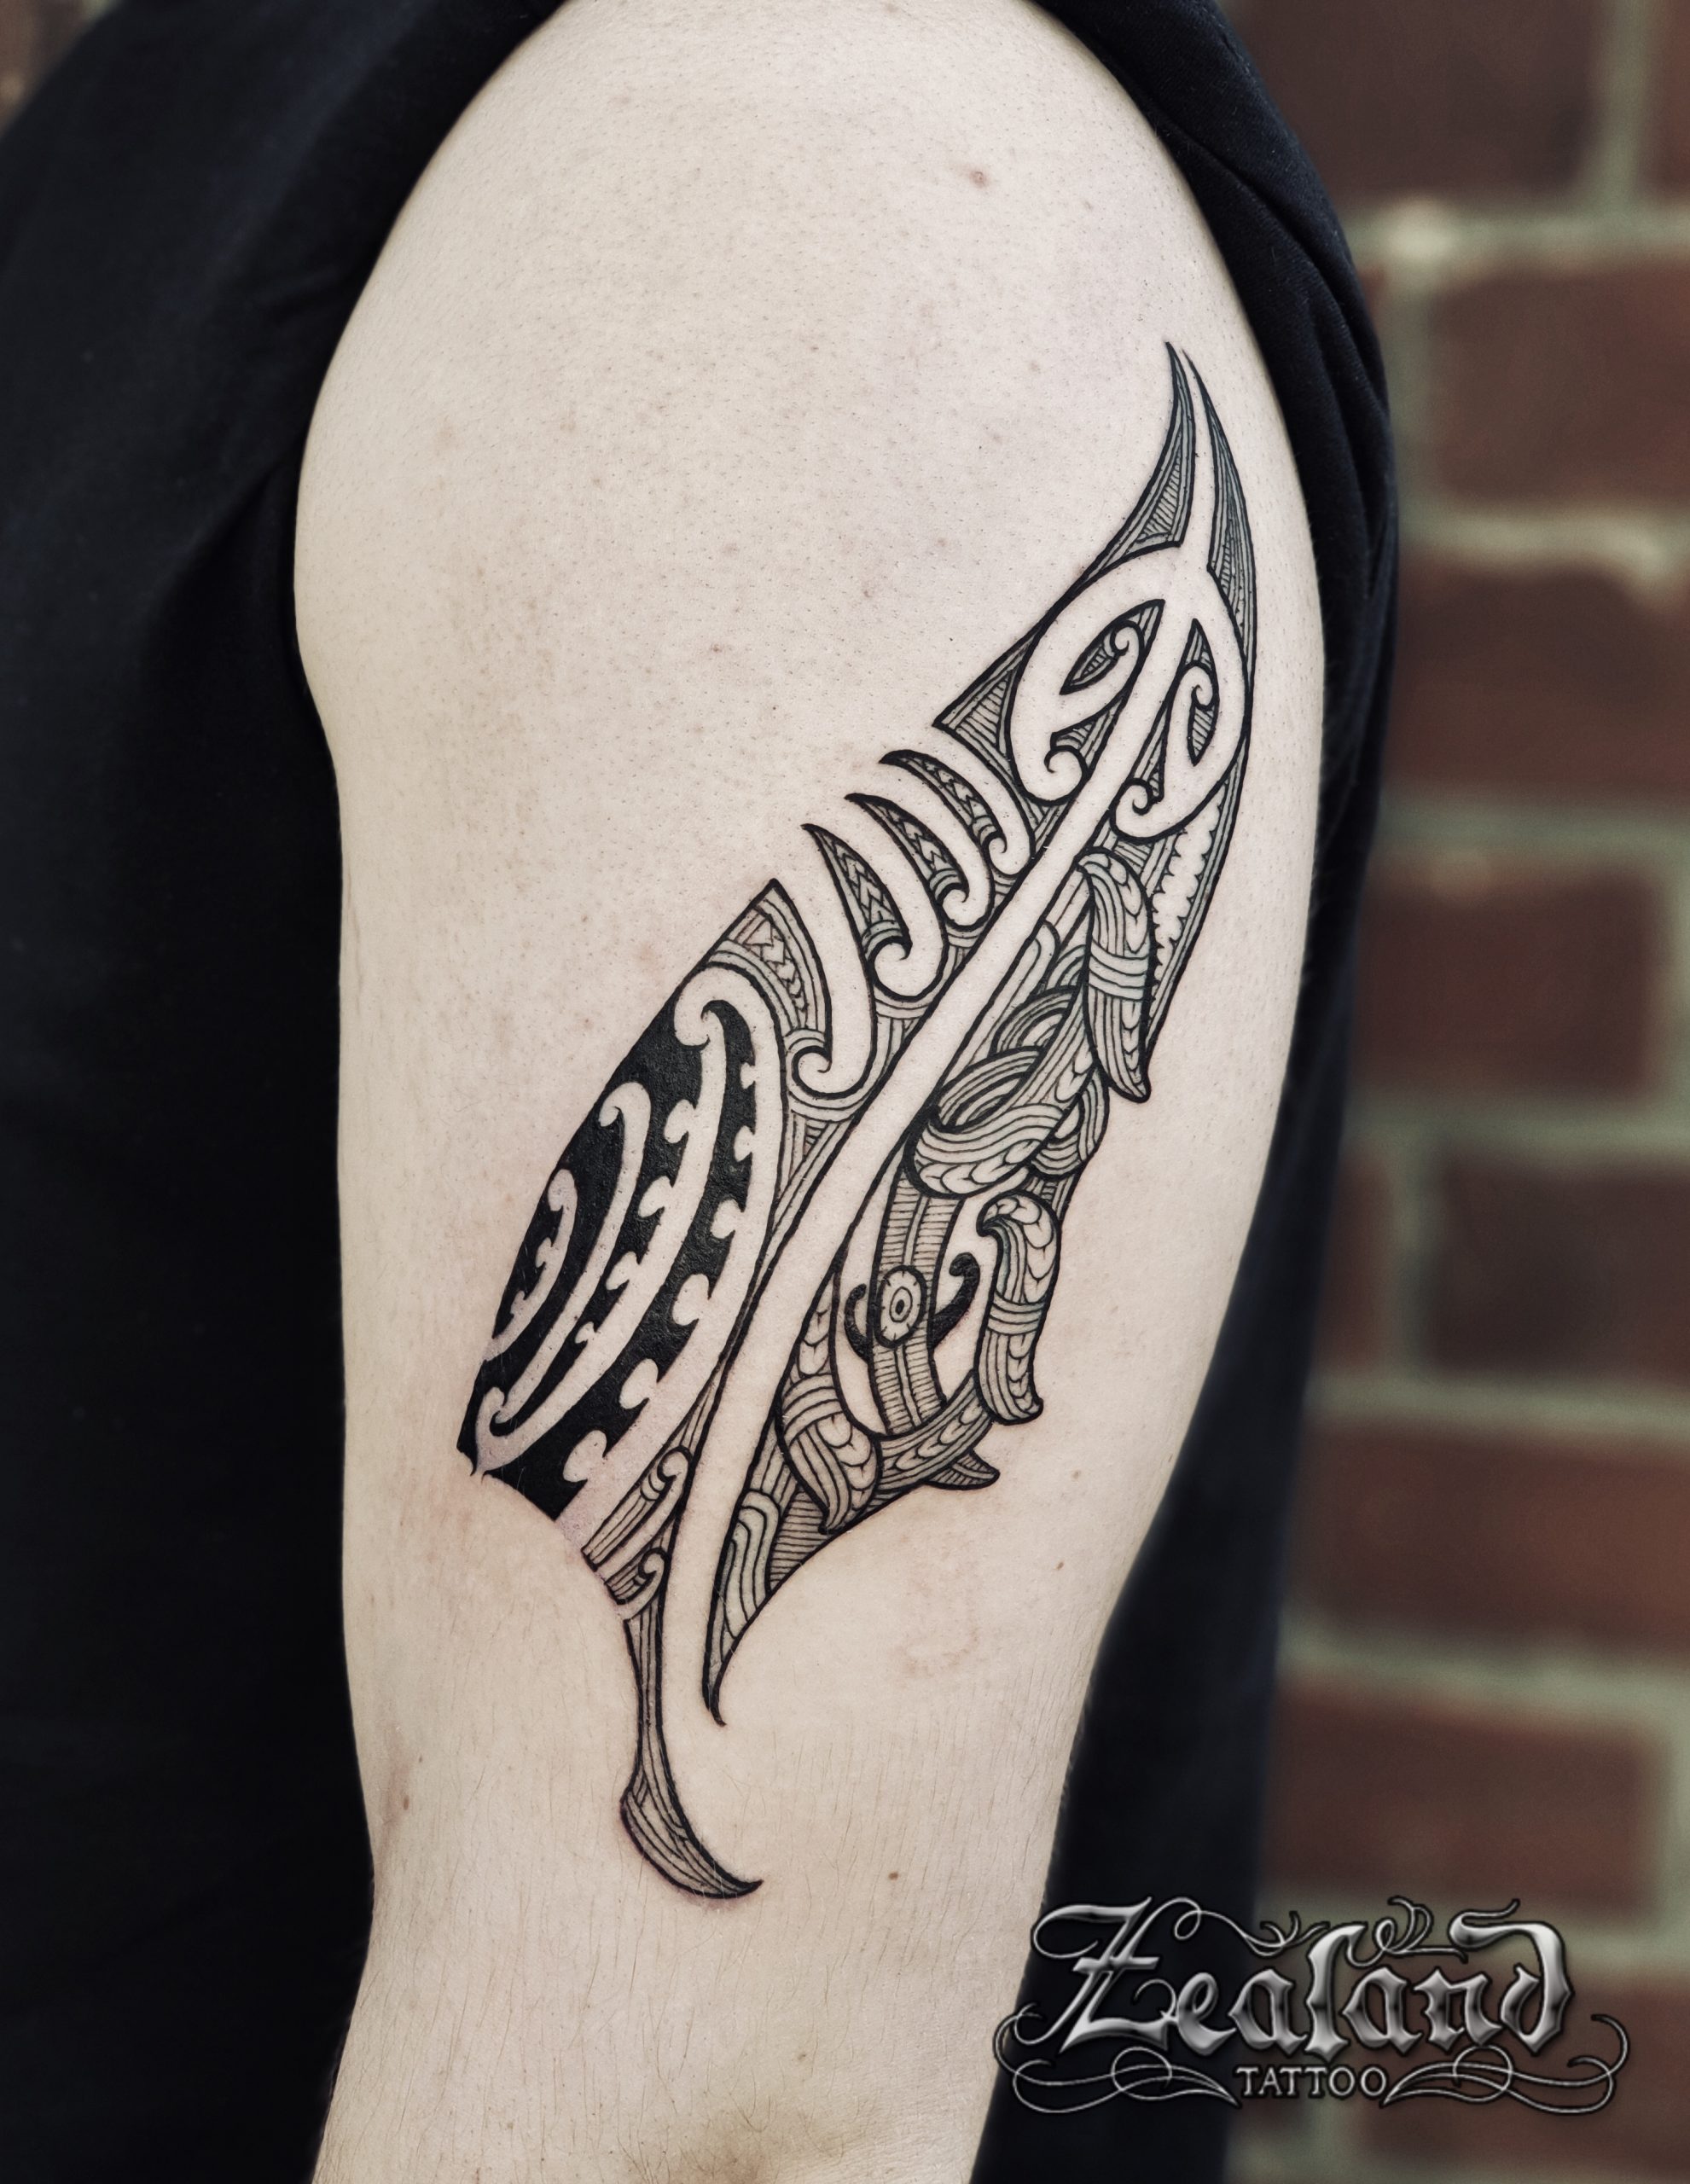 Top 5 Most Popular Masculine Tattoo Designs for Men | by Celebrity Ink  Tattoo Studio Southport | Medium